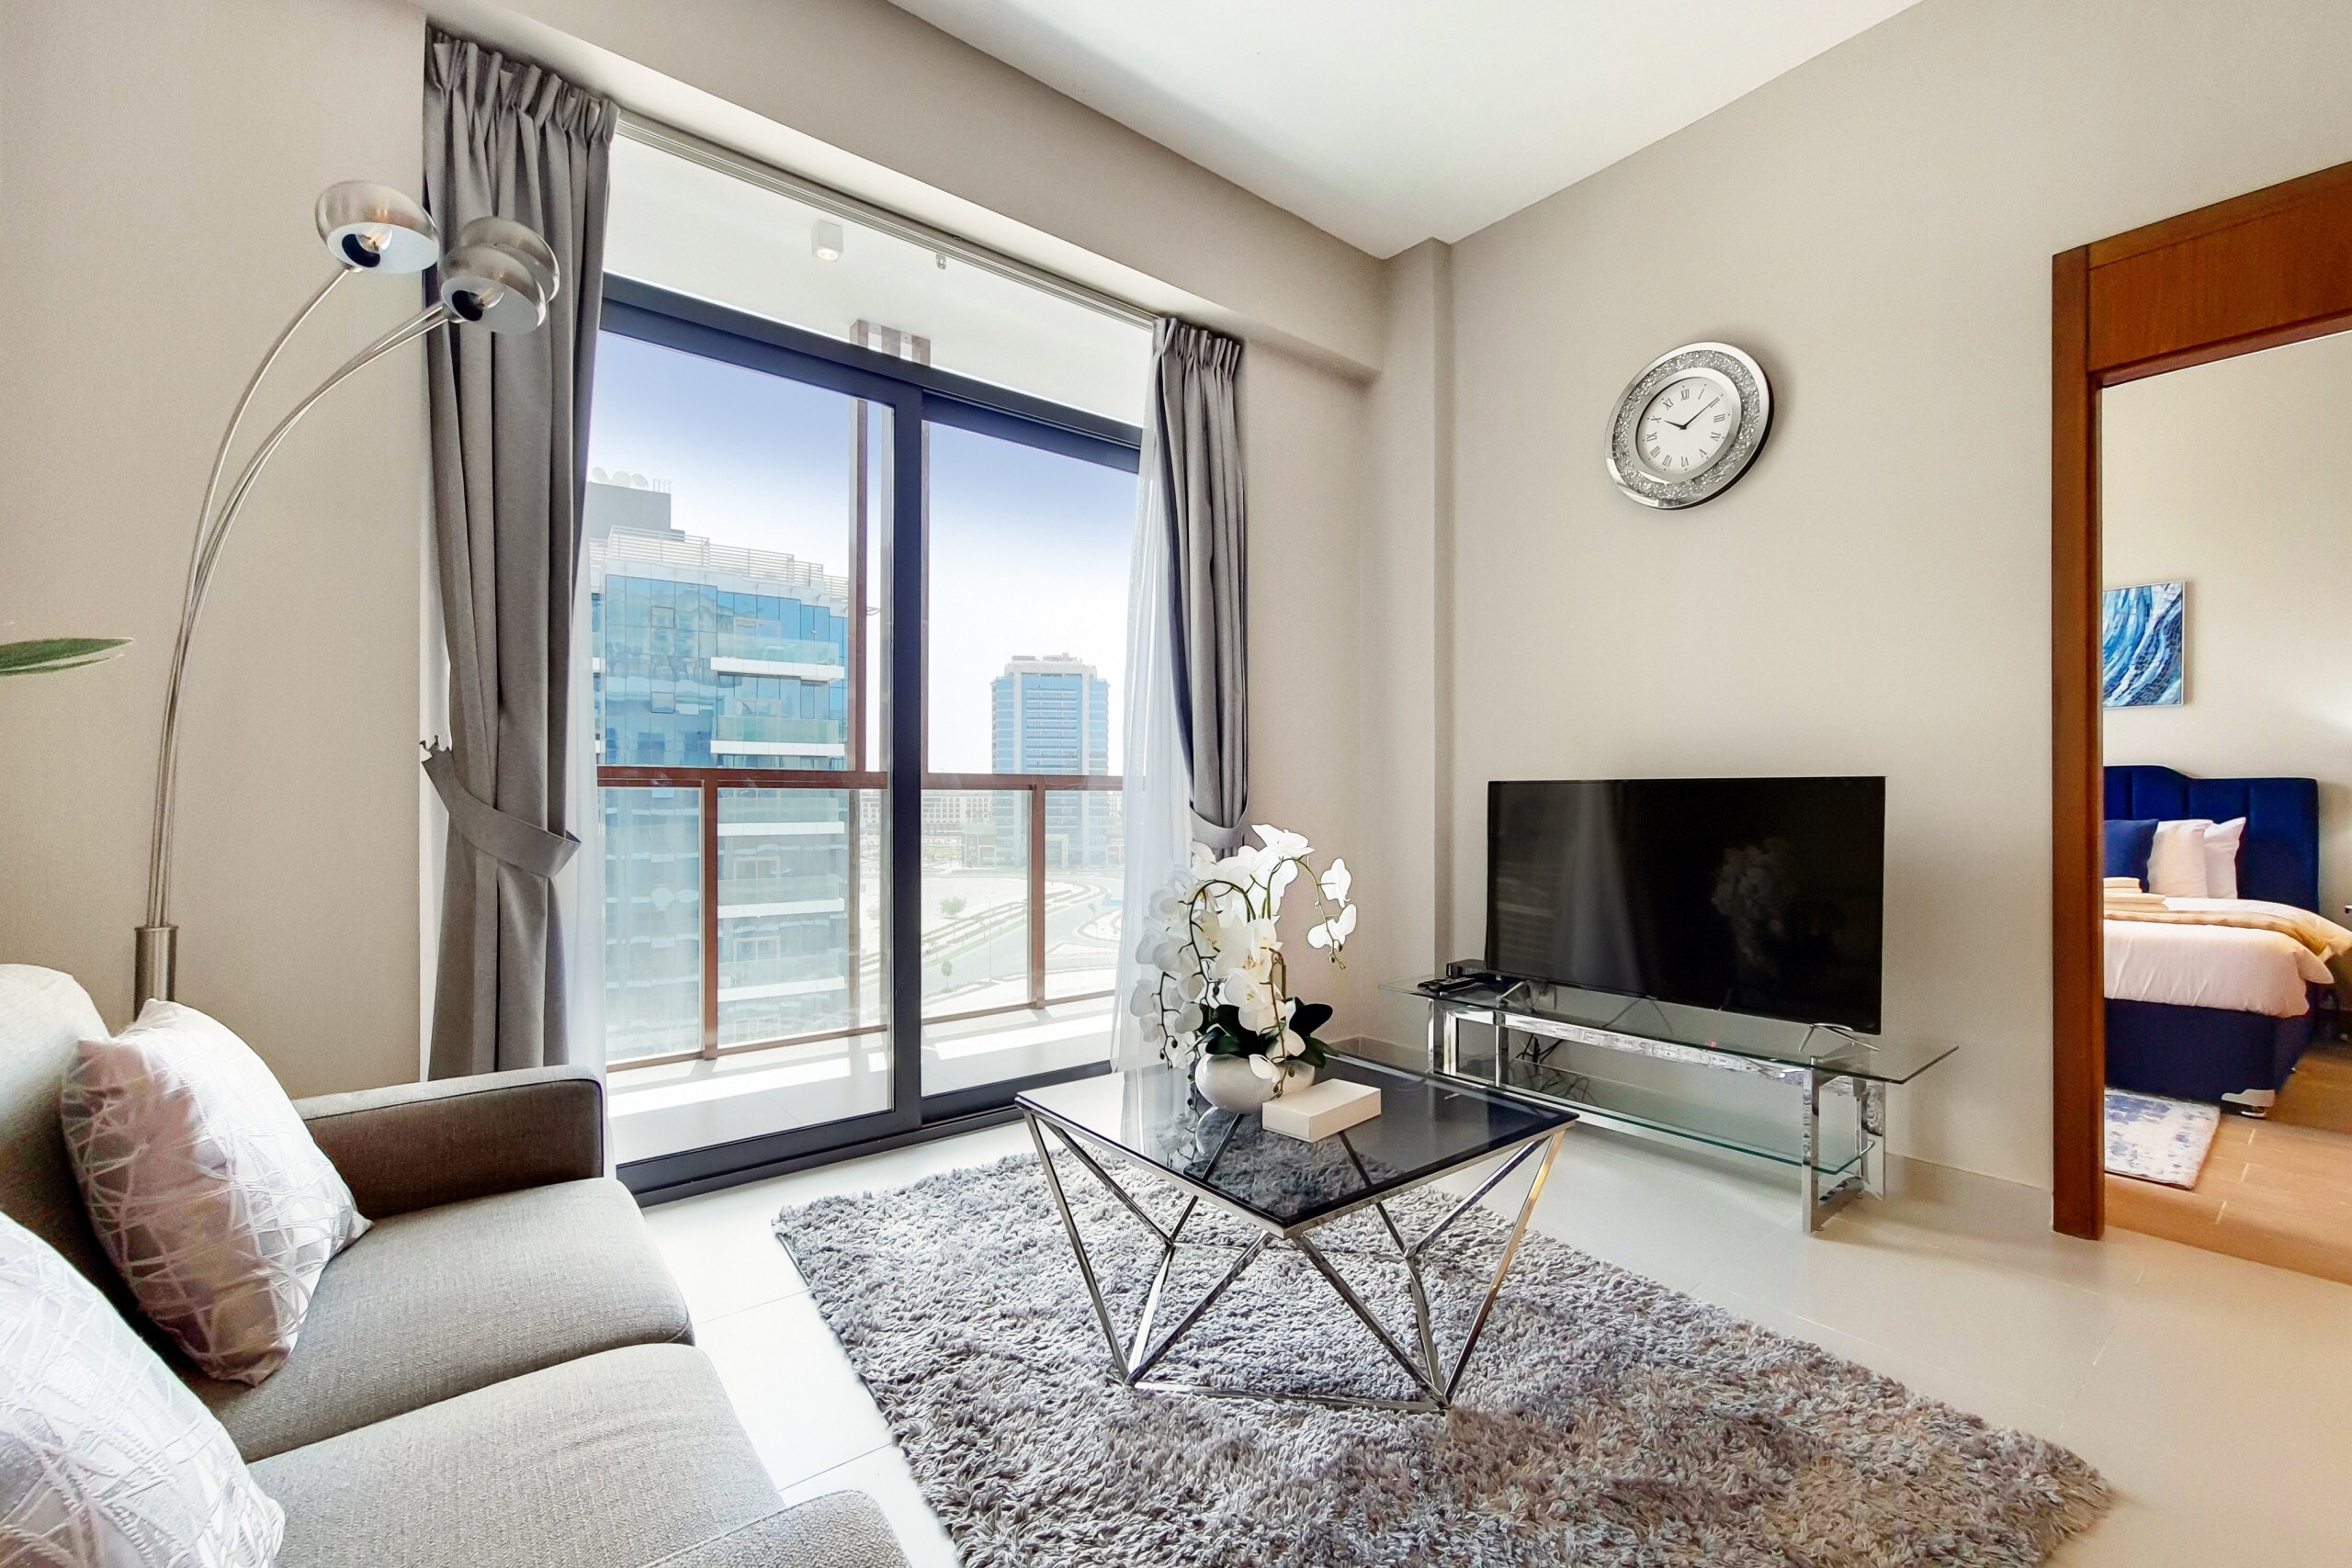 Property Image 2 - Luxury-taste and Spacious 1BR in Arjaan Dubailand